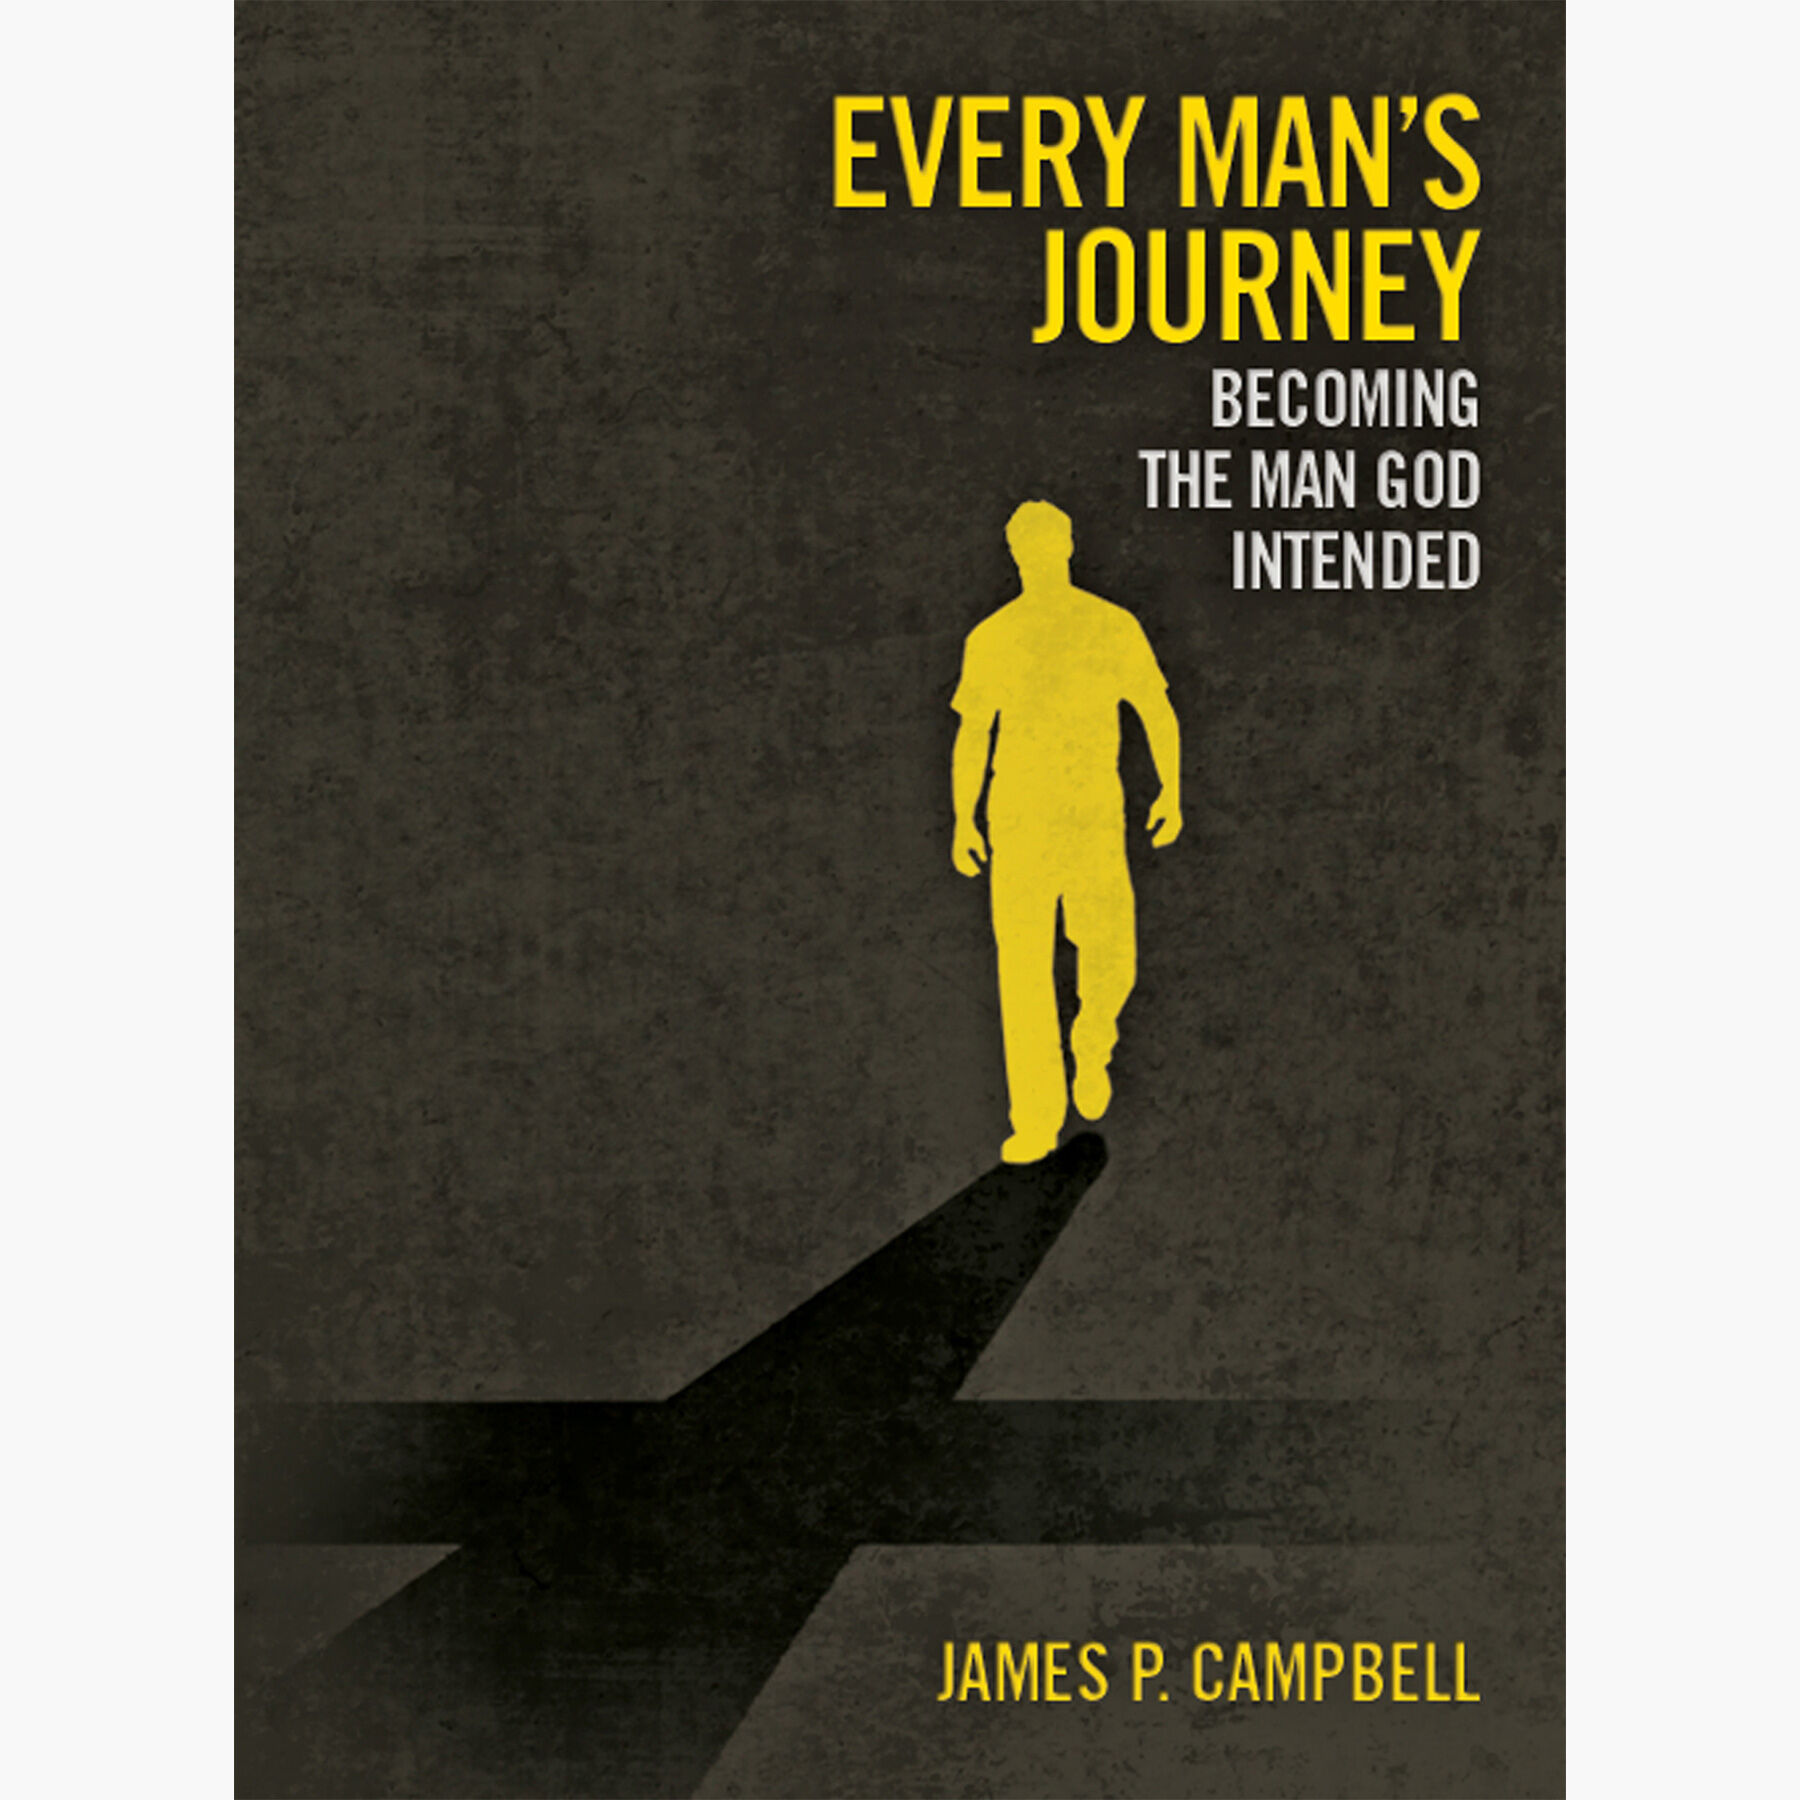 Our People, Our Journey by James McClurken